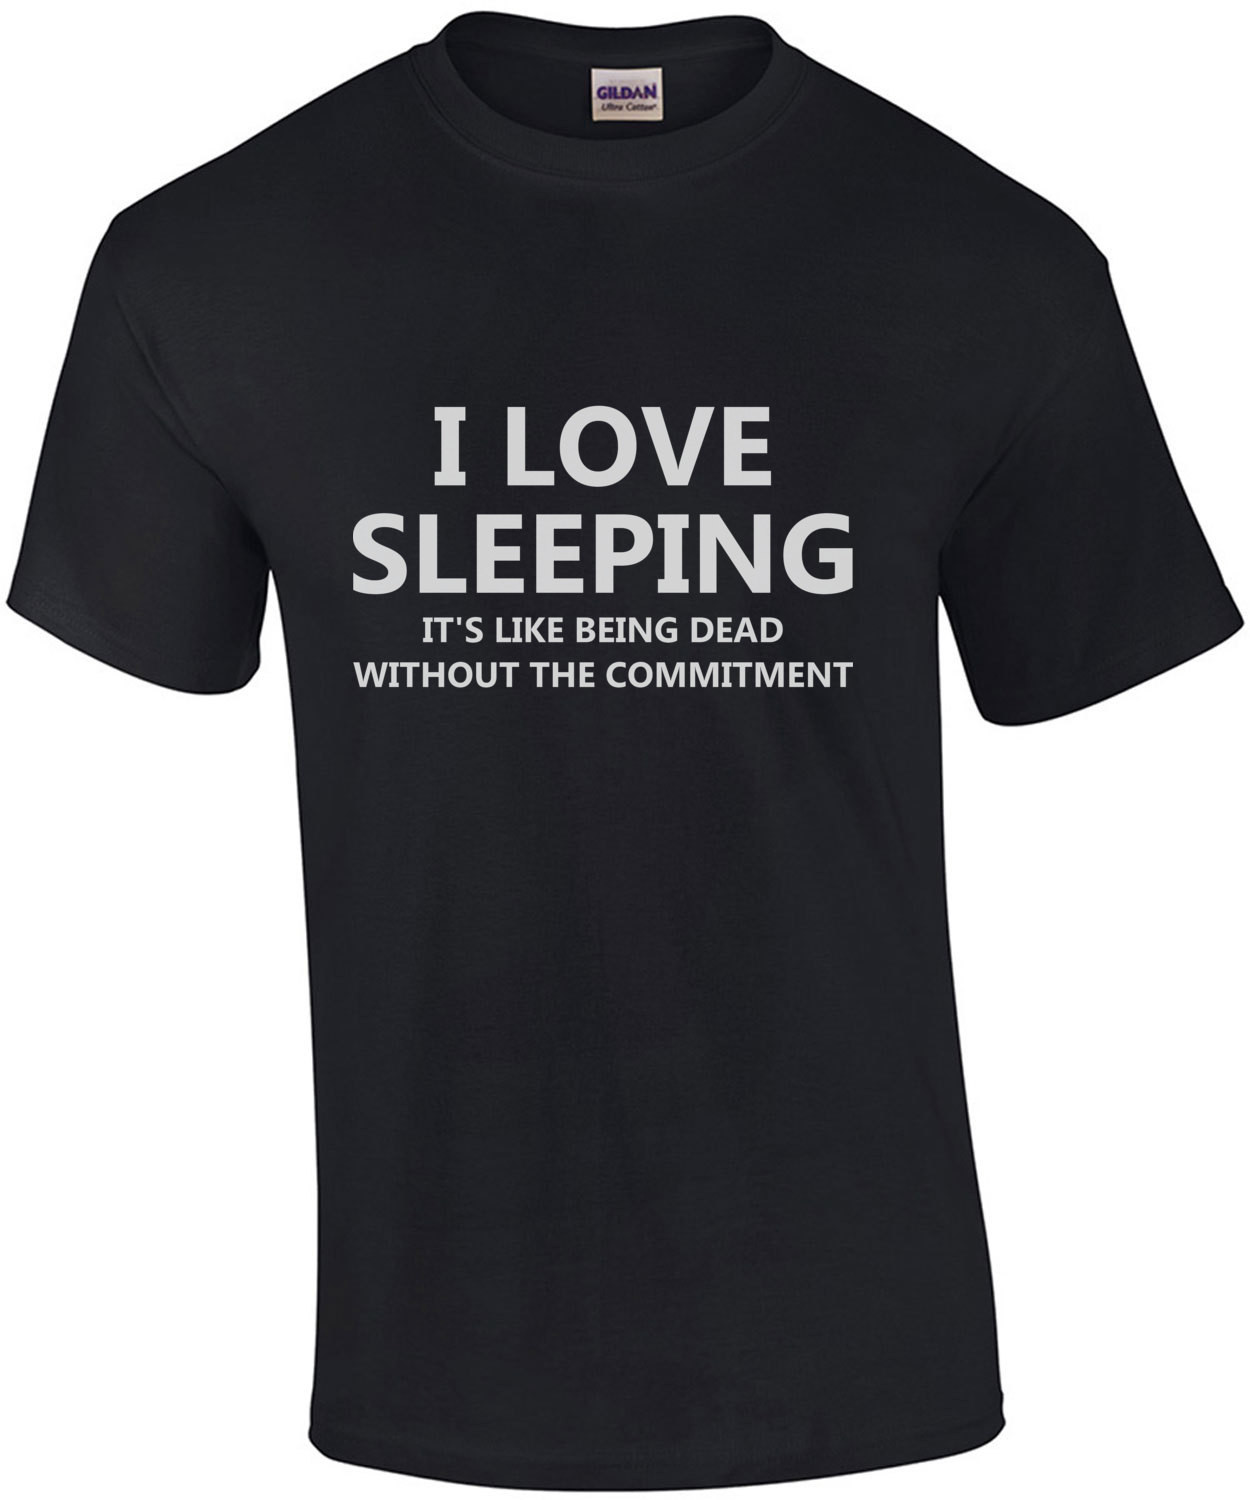 I love sleeping it's like being dead without the commitment - funny sarcastic